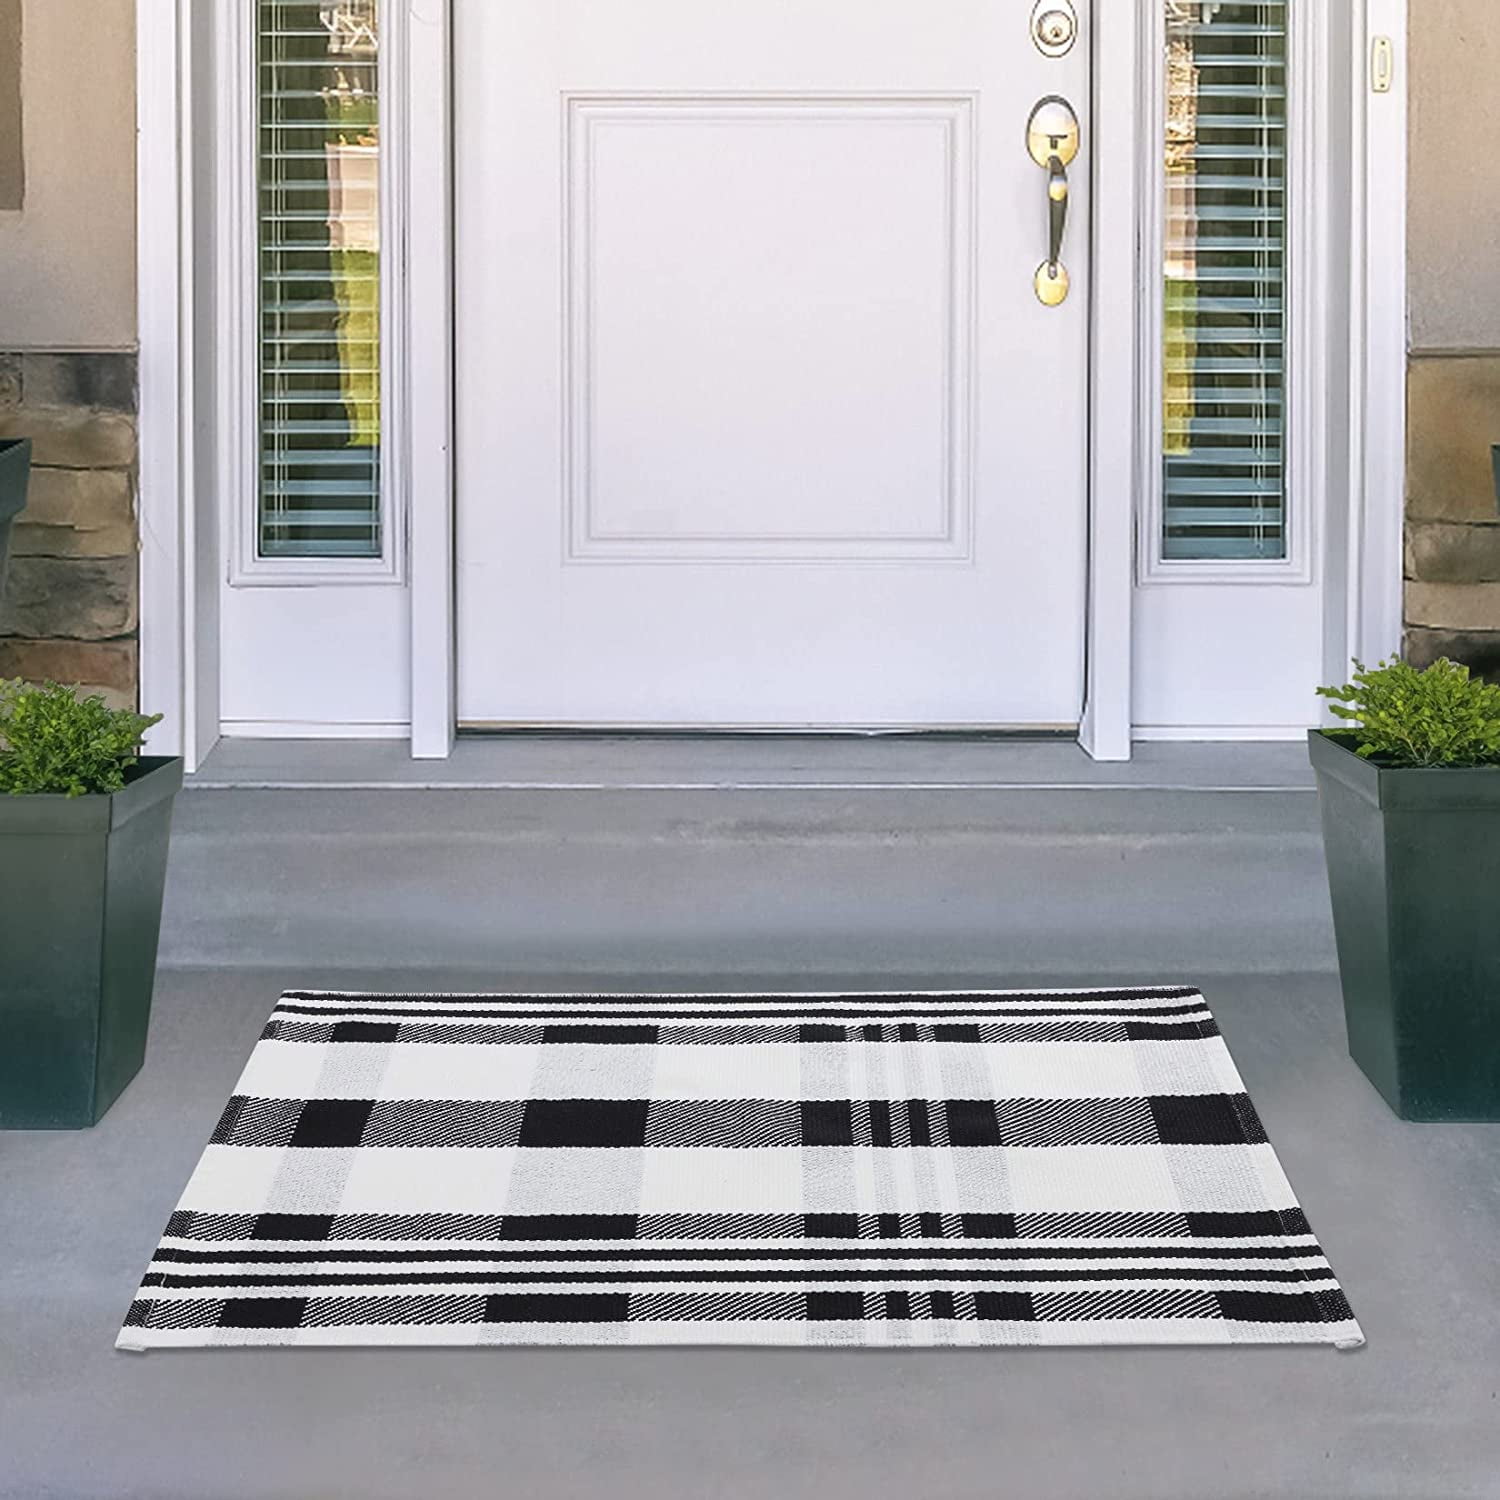 Washable Plaid Outdoor Rug 23.6 x 51.2 Inches Front Door Mat, Washable  Outdoor Rugs for Layered Door Mats Porch/Front Porch/Farmhouse Red and Black